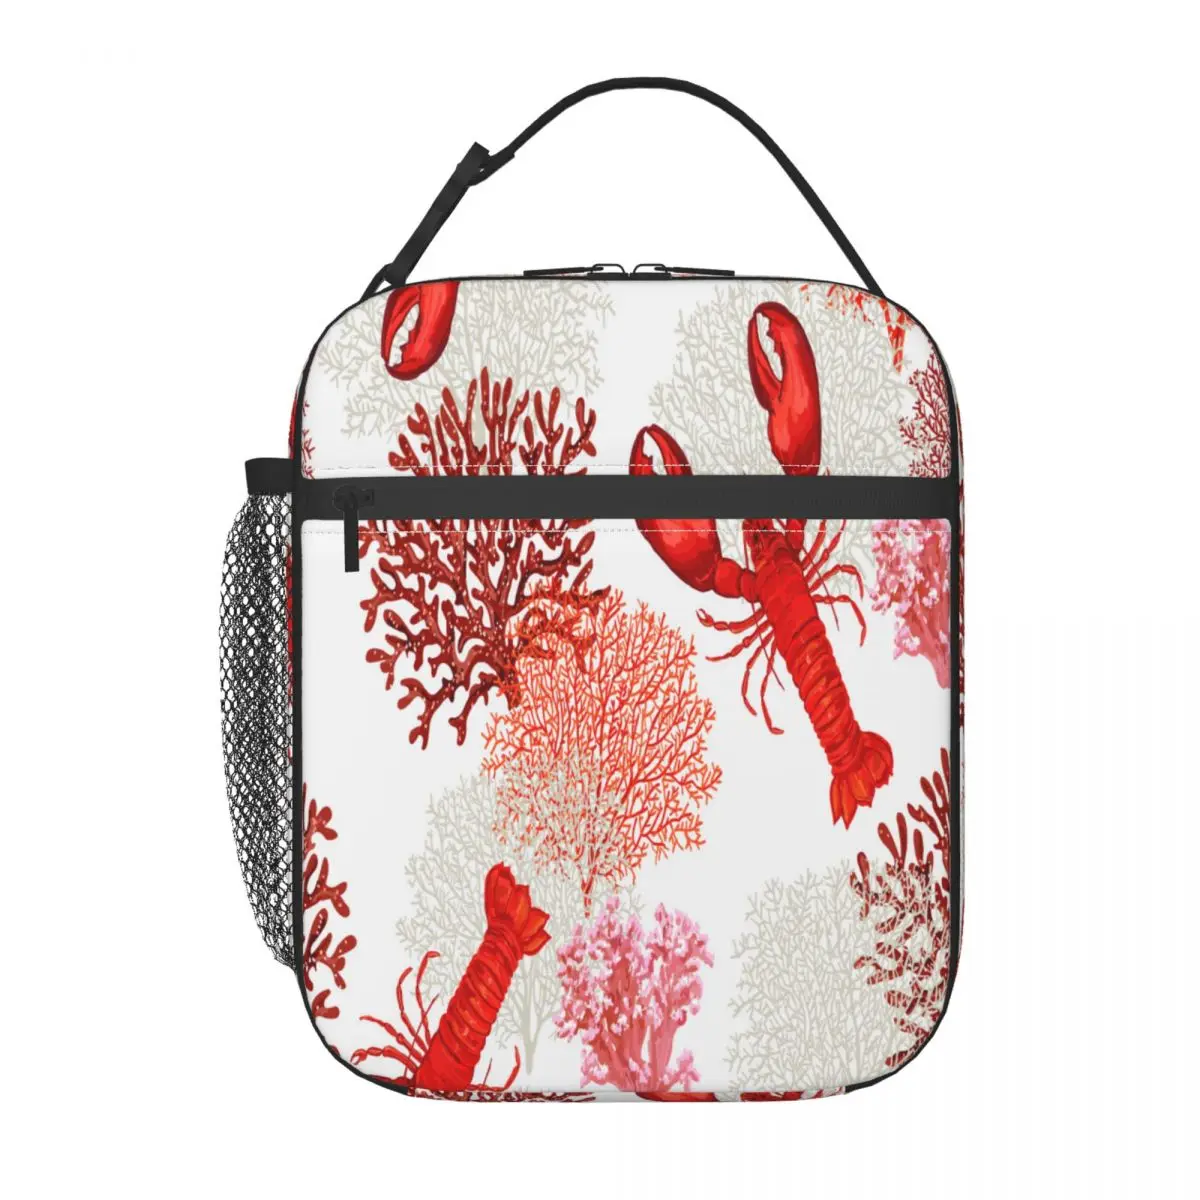 

Cooler Lunch Bag Tropical Marine Lobster Anchor Corals Insulated Thermal Food Picnic Handbag Portable Shoulder Lunch Box Tote